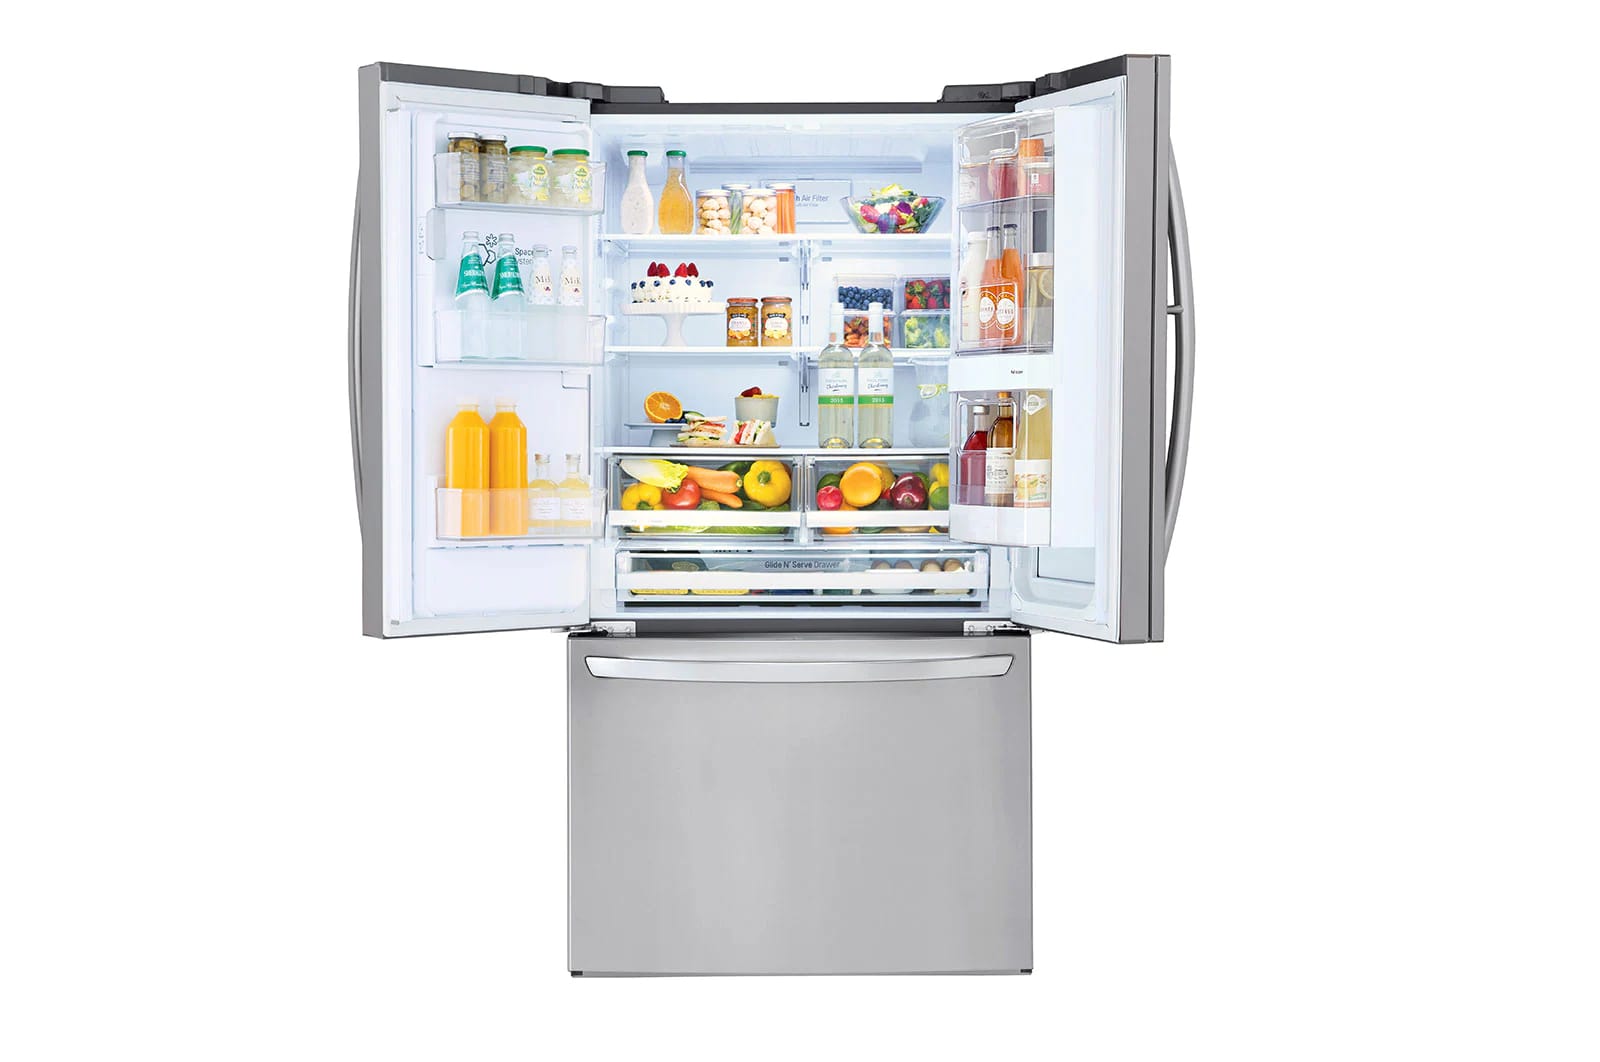 LG - 35.75 Inch 27.5 cu. ft French Door Refrigerator in Stainless - LFXS28596S